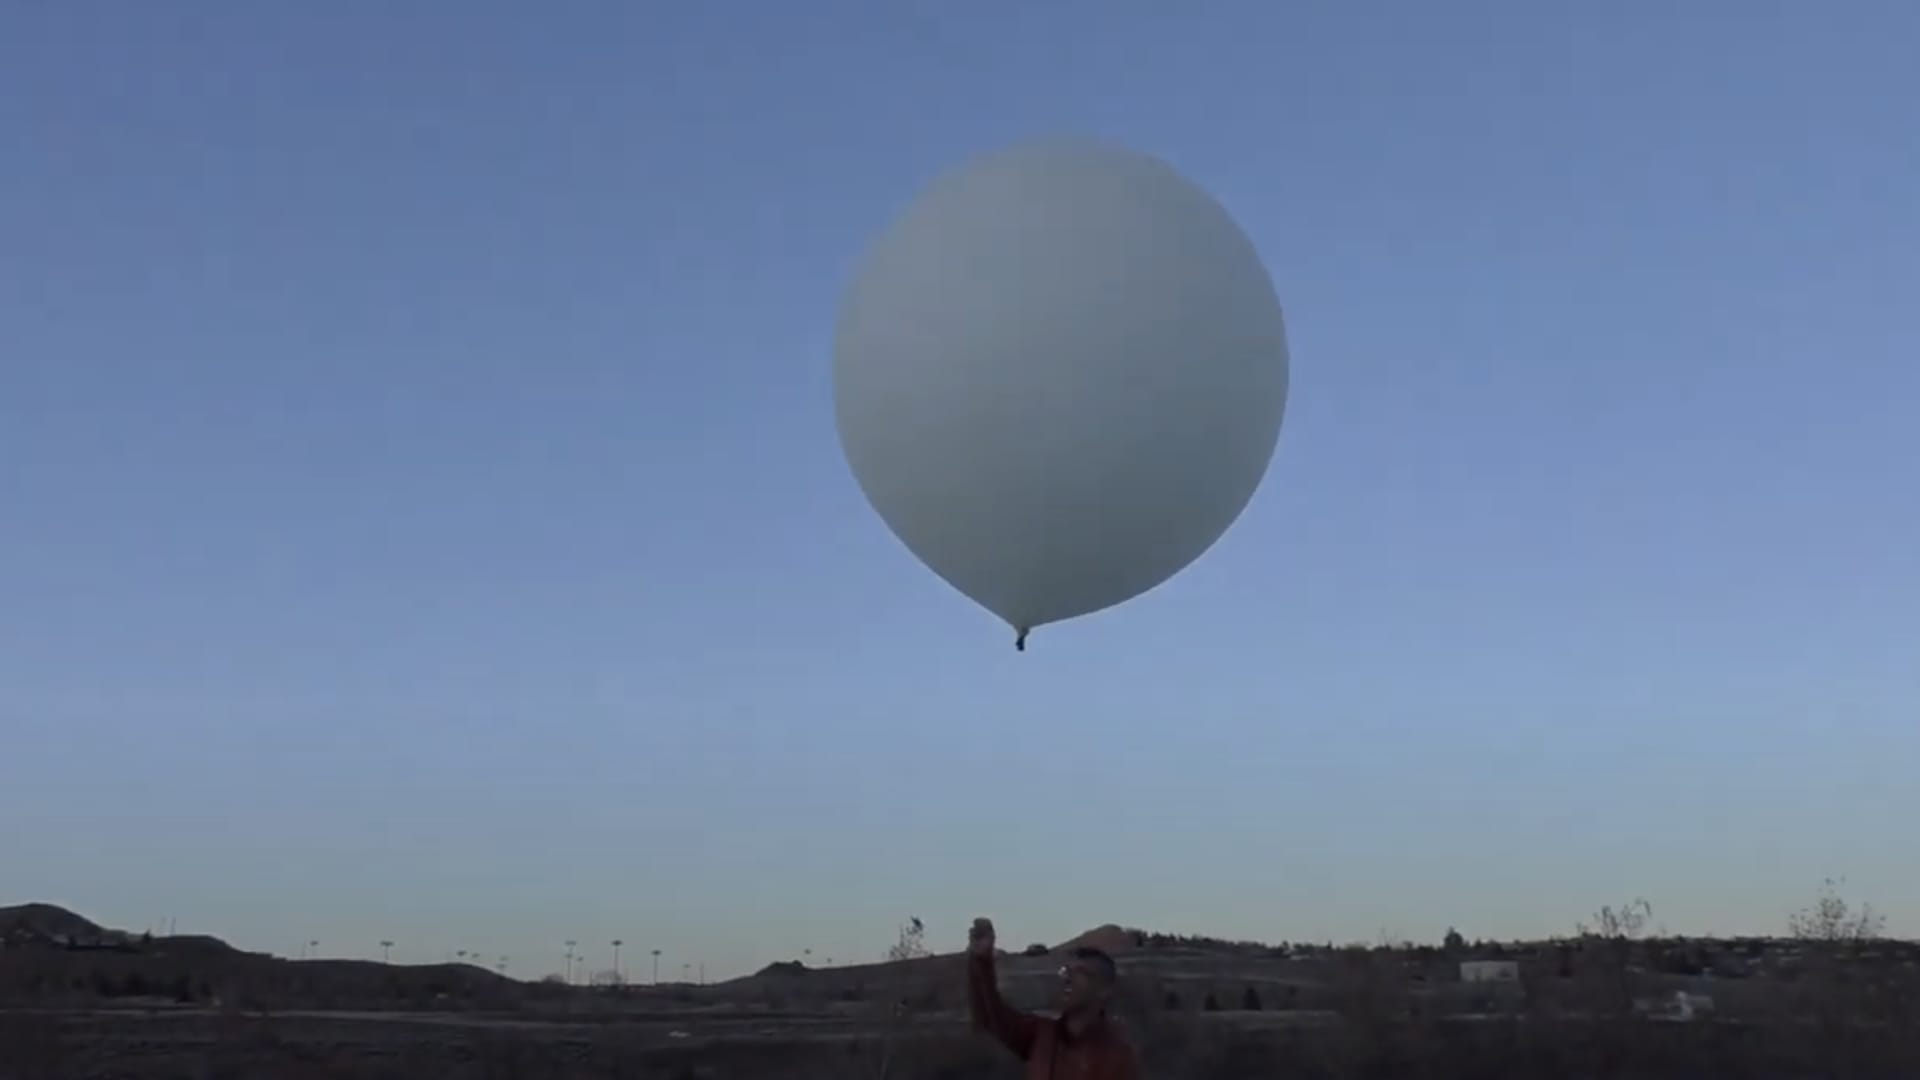 Luke Iseman, the founder of Make Sunsets, is about to launch a weather balloon filled with sulfur dioxide and helium into the air in Nevada.